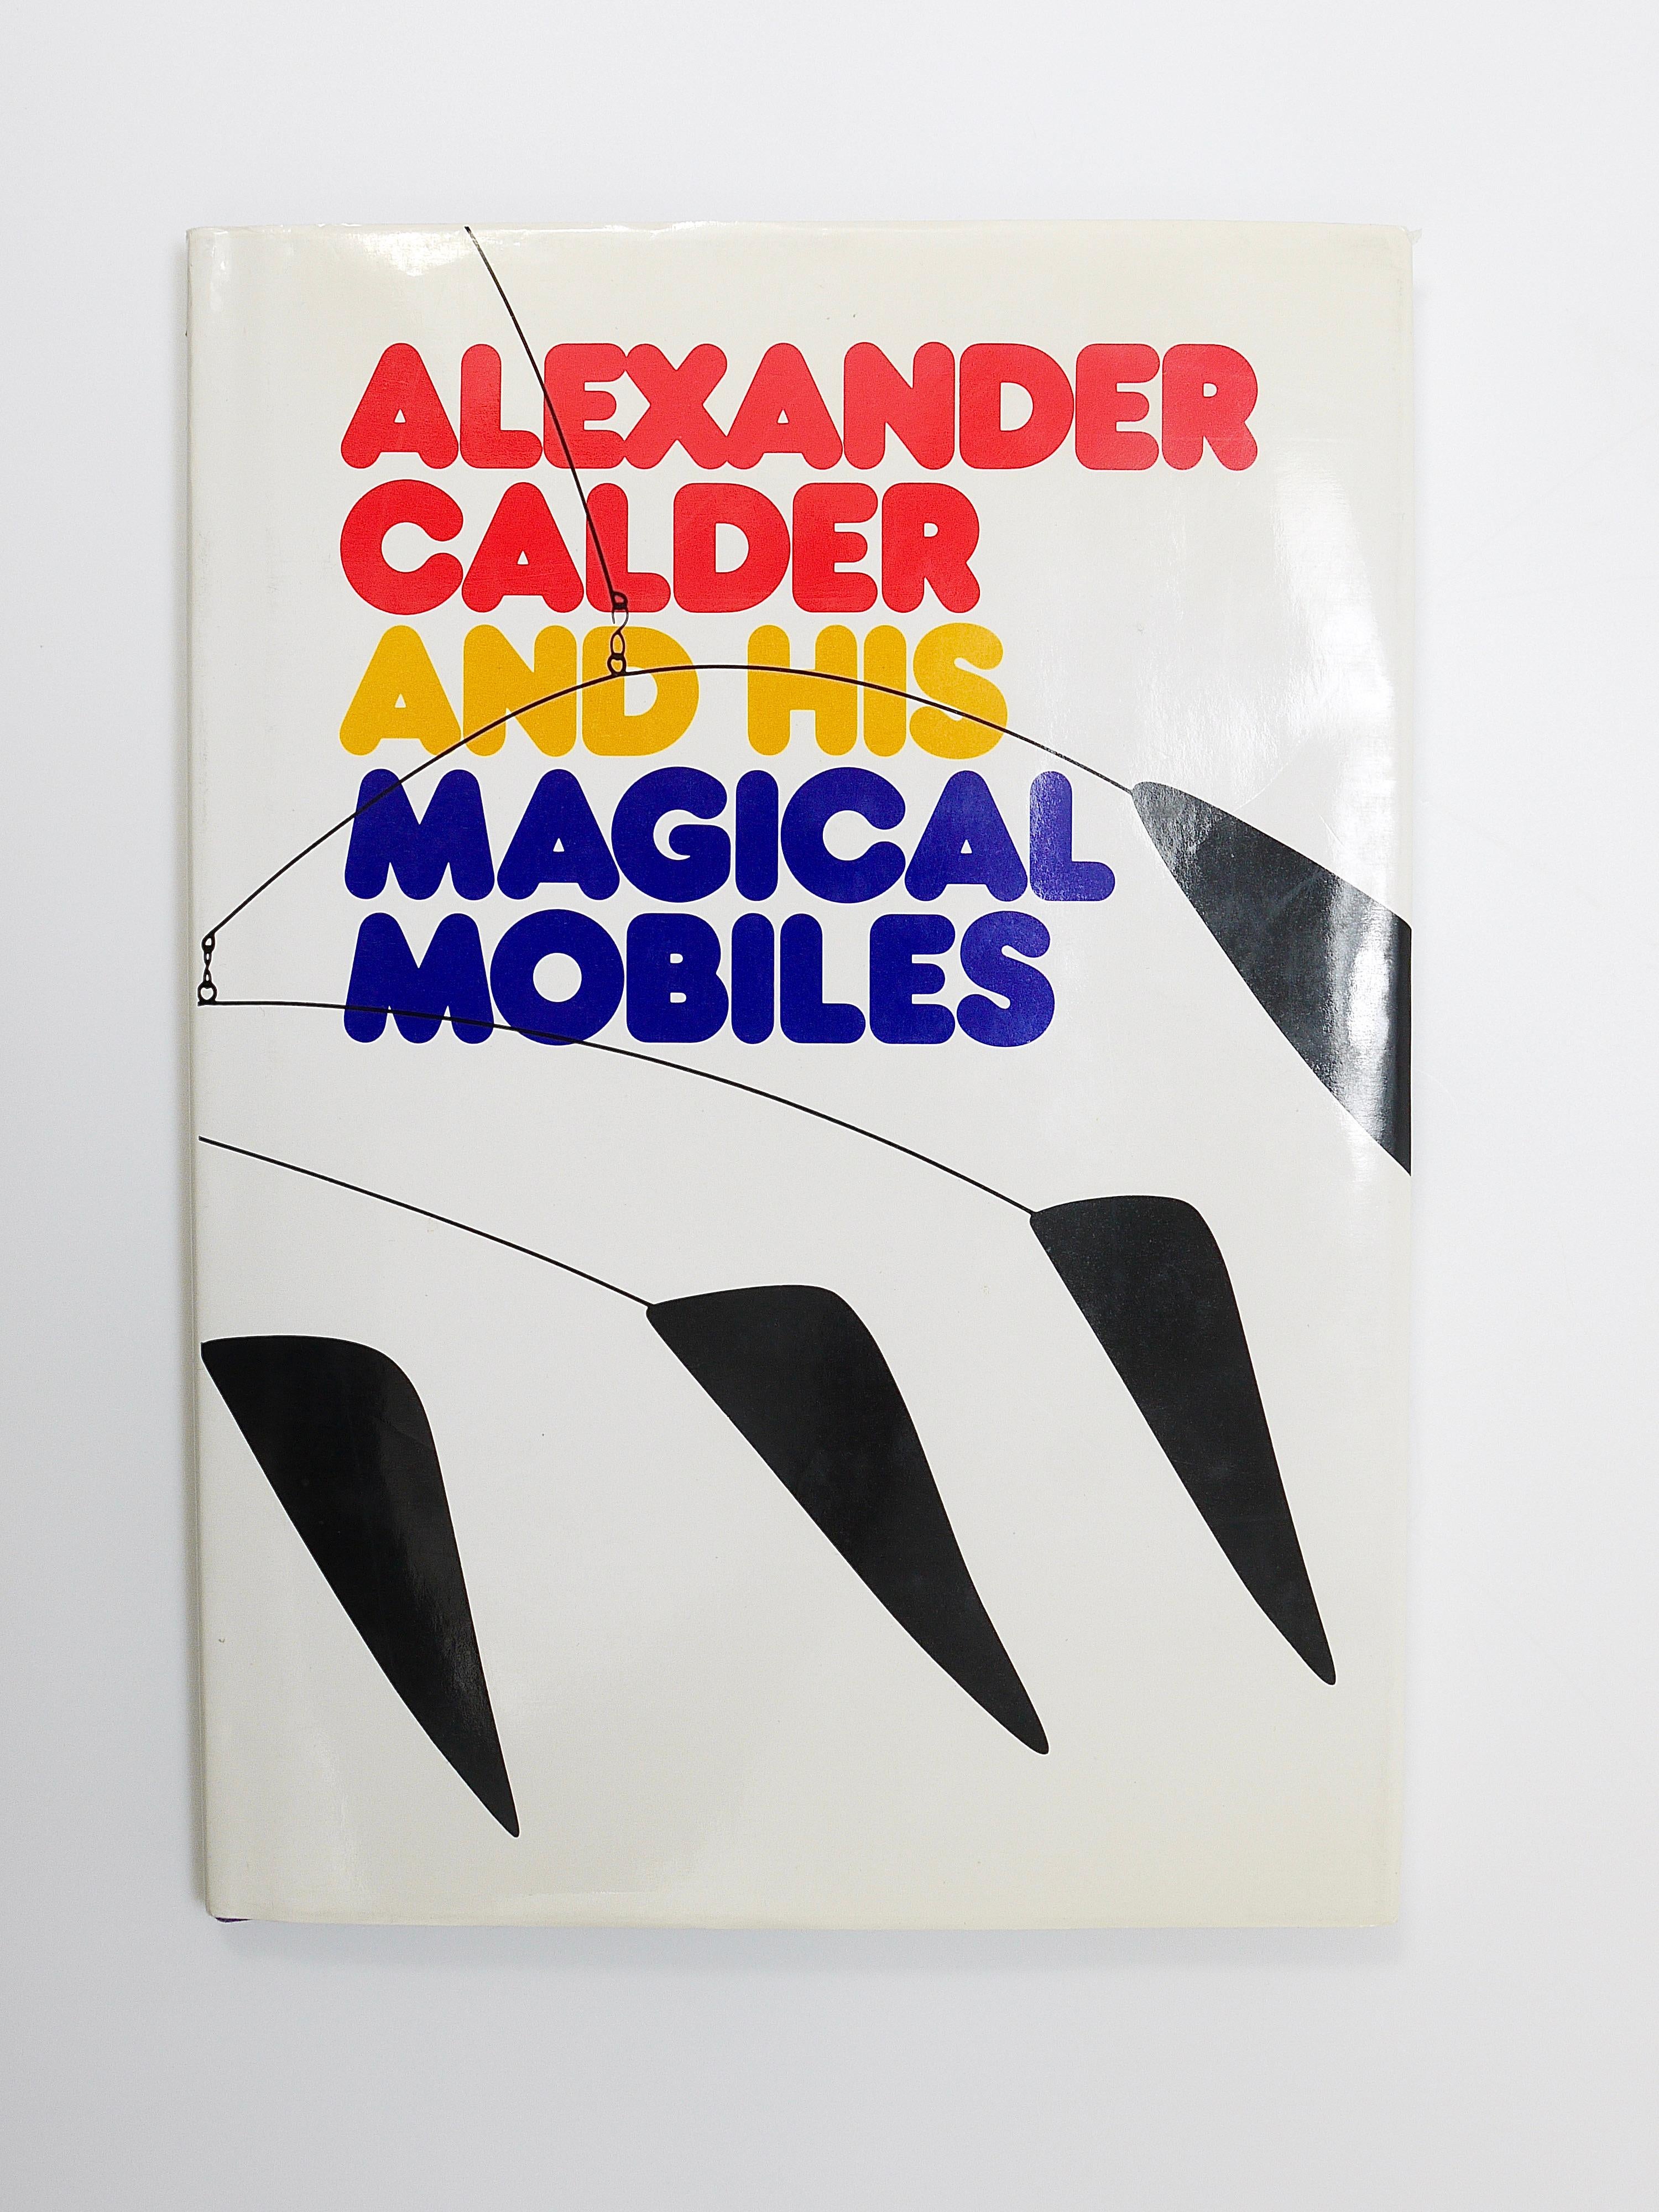 A great art book about sculptor Alexander (Sandy) Calder by Gene Lipman, a long-time friend of Calder, and Margaret Aspinwall. 1st Edition from 1981. 
7.5X10.25“, 96 pages, 95 illustrations, hardcover with dust jacket. 
The book describes the life